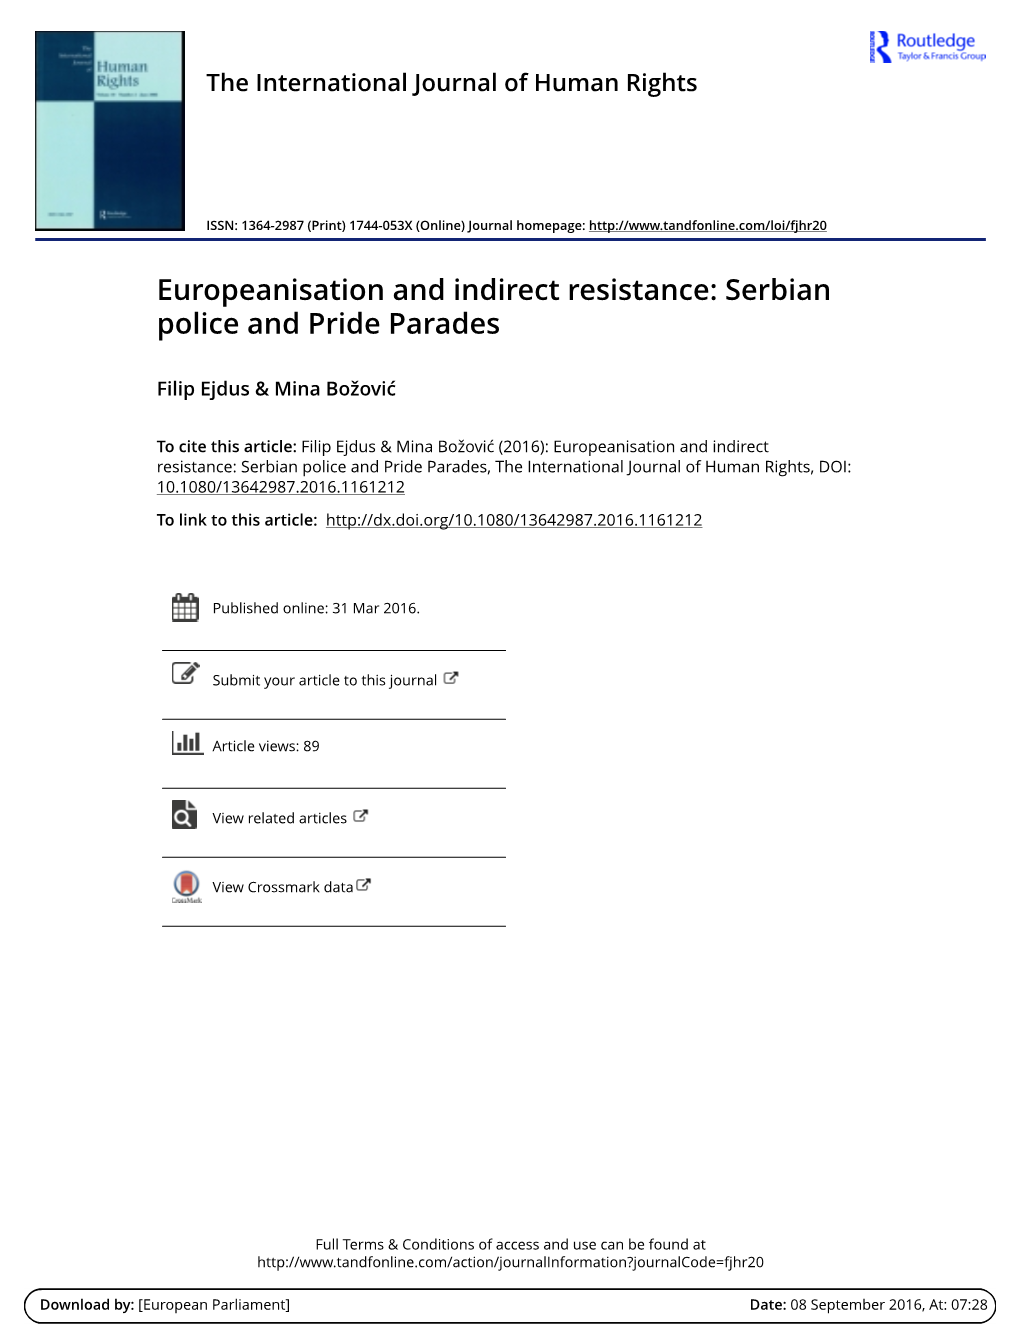 Europeanisation and Indirect Resistance: Serbian Police and Pride Parades